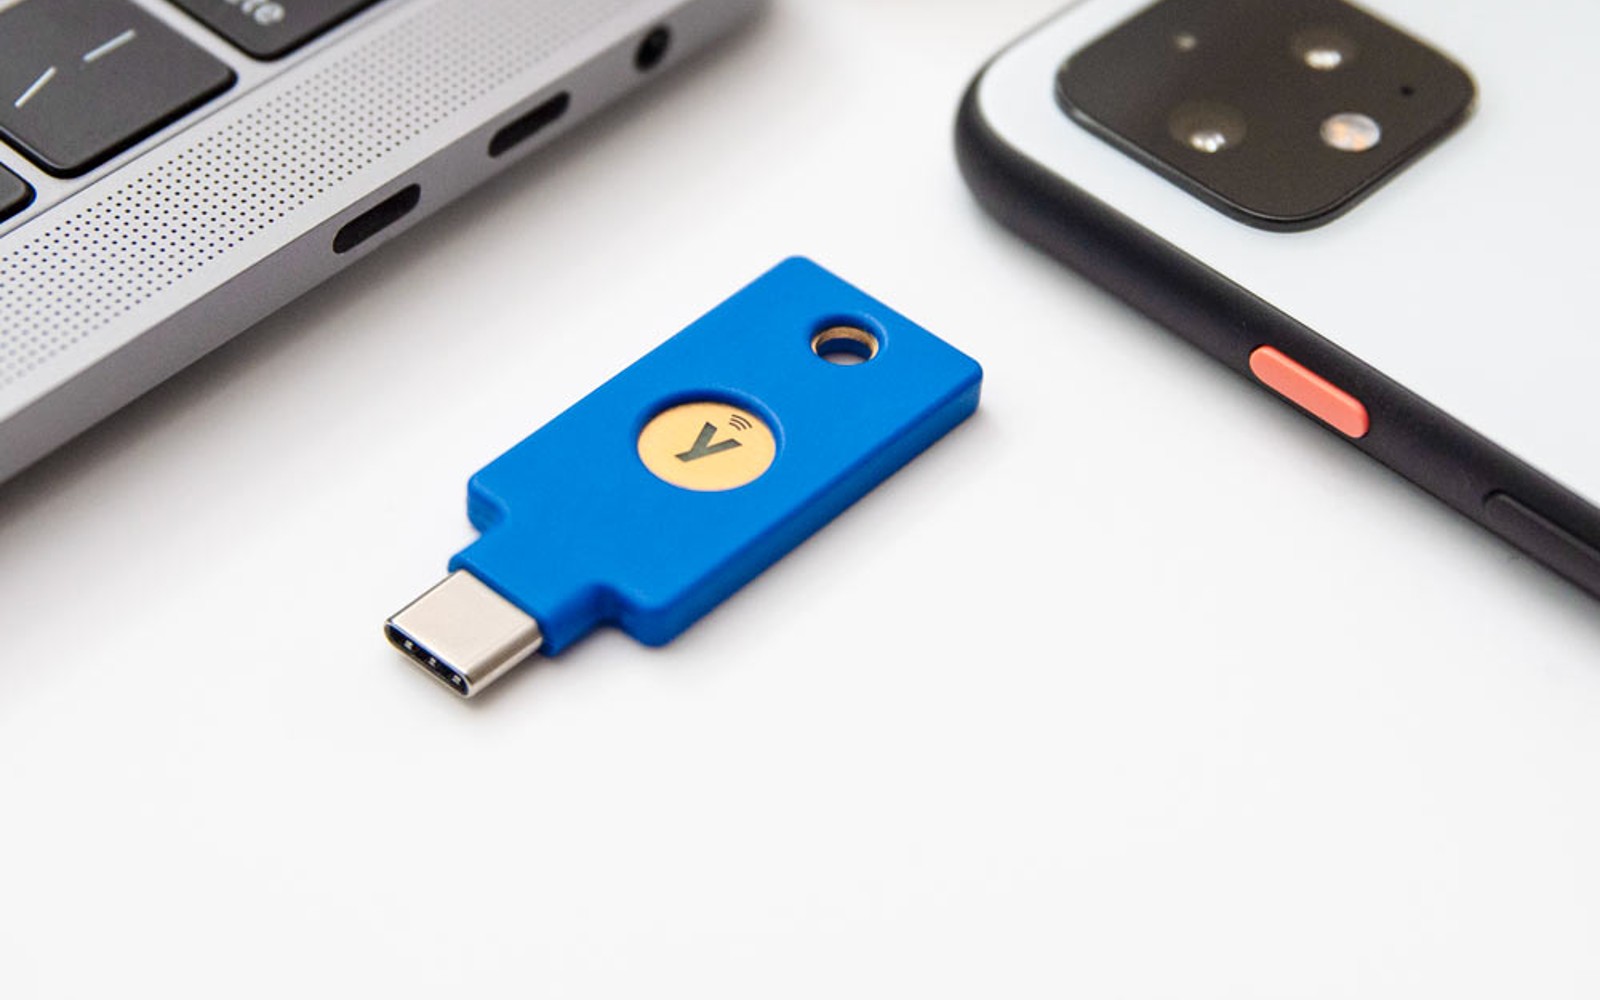 Yubico’s newest security offers USB-C and NFC authentication for $29